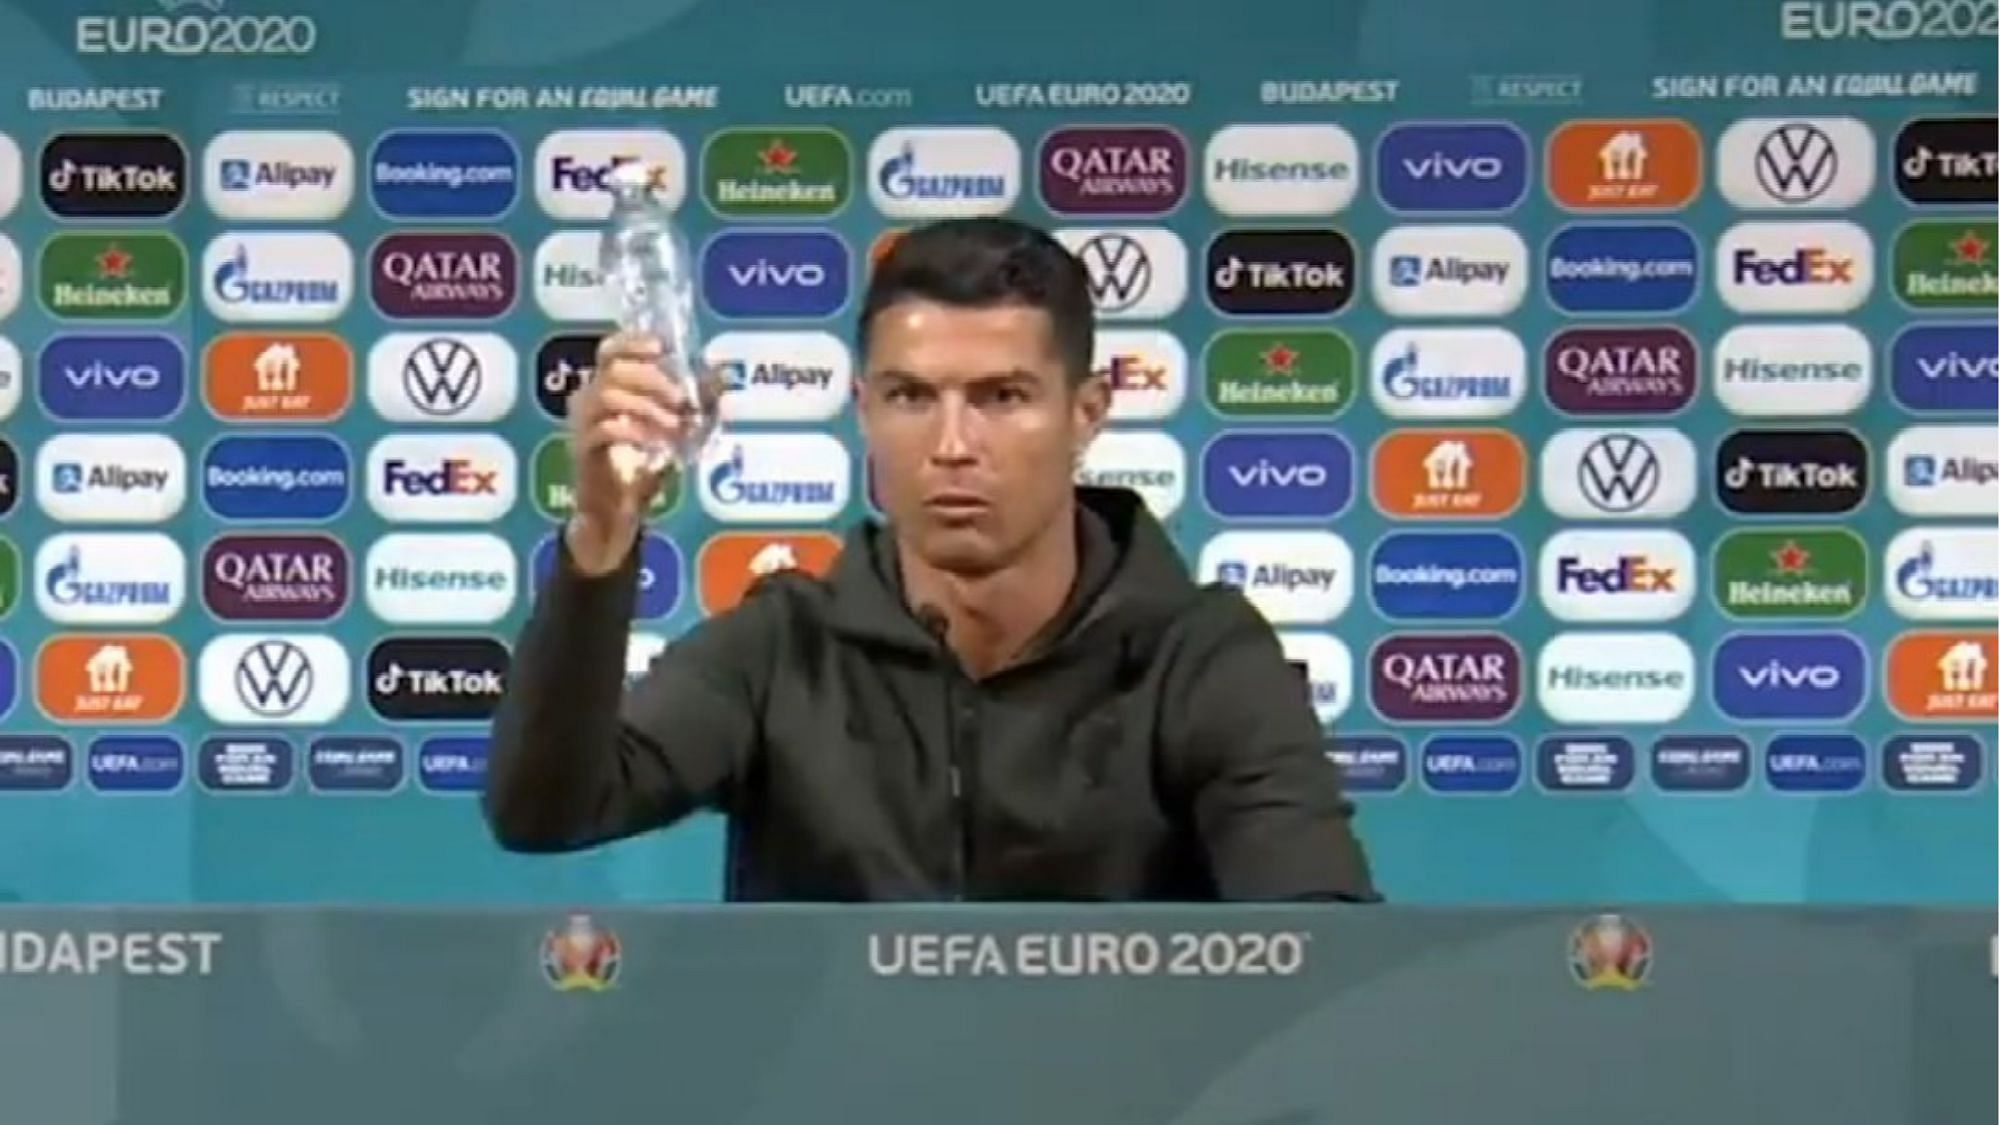 Ronaldo Replacing Coca Cola With Water Sparks Meme Fest On Twitter Flipboard